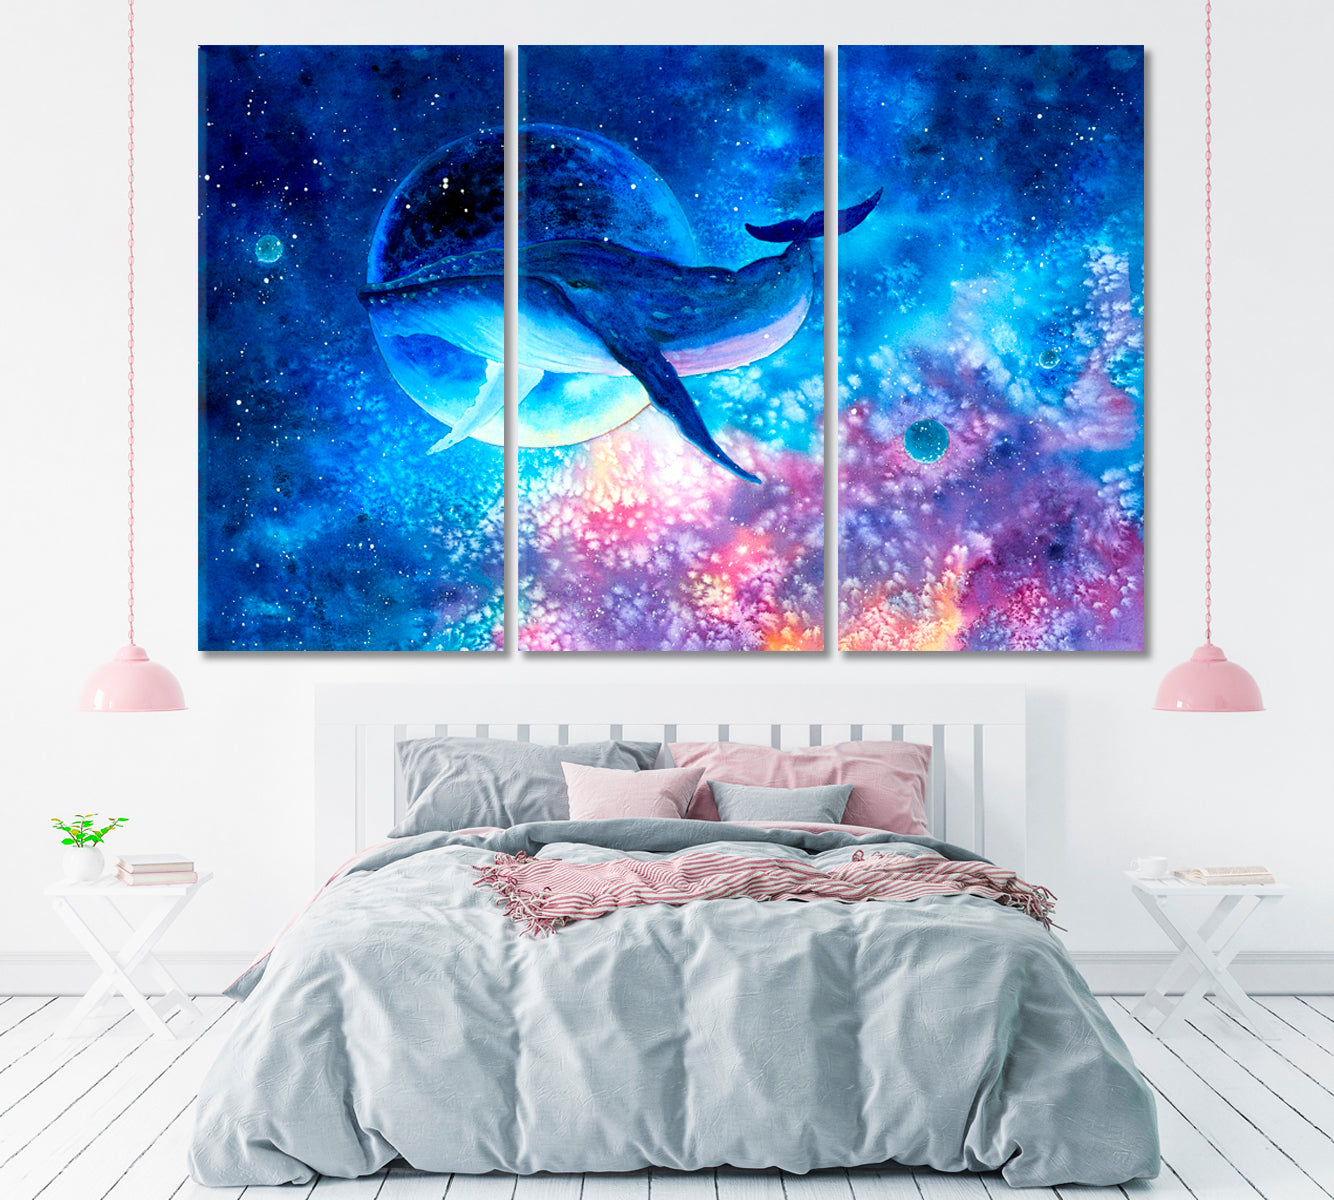 Whale in Space Canvas Print ArtLexy 3 Panels 36"x24" inches 